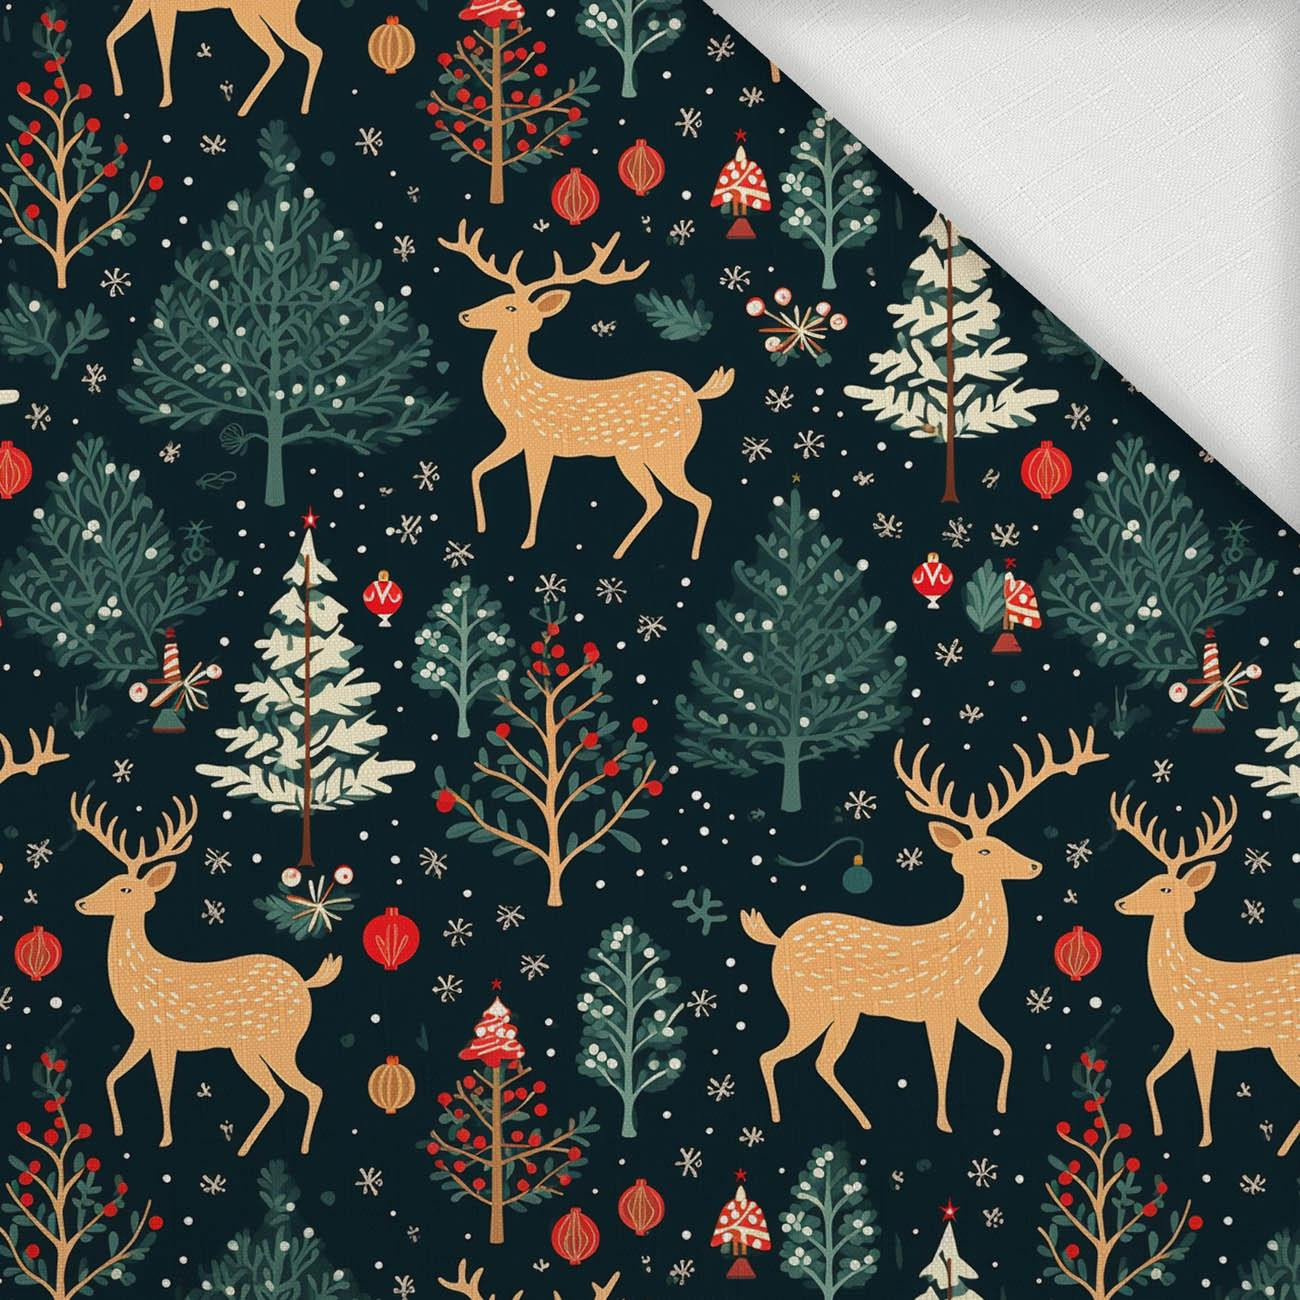 CHRISTMAS FOREST - Woven Fabric for tablecloths